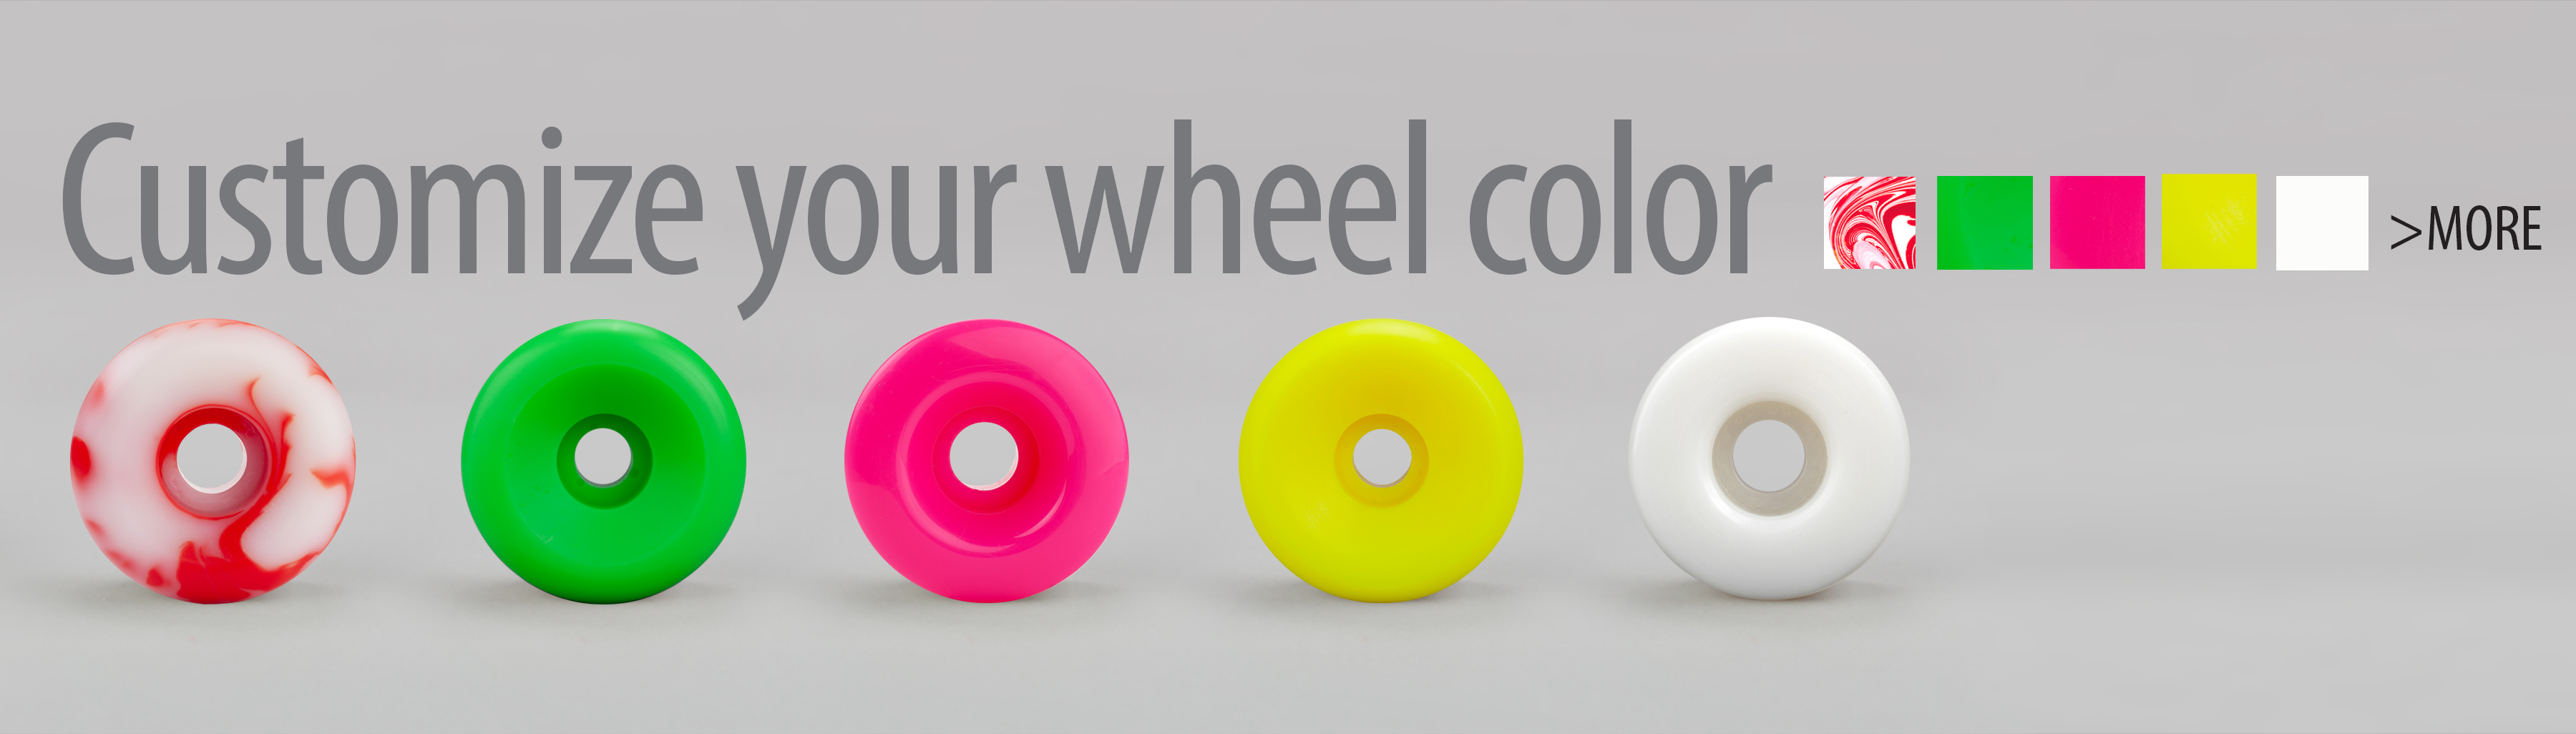 Customize your wheel color